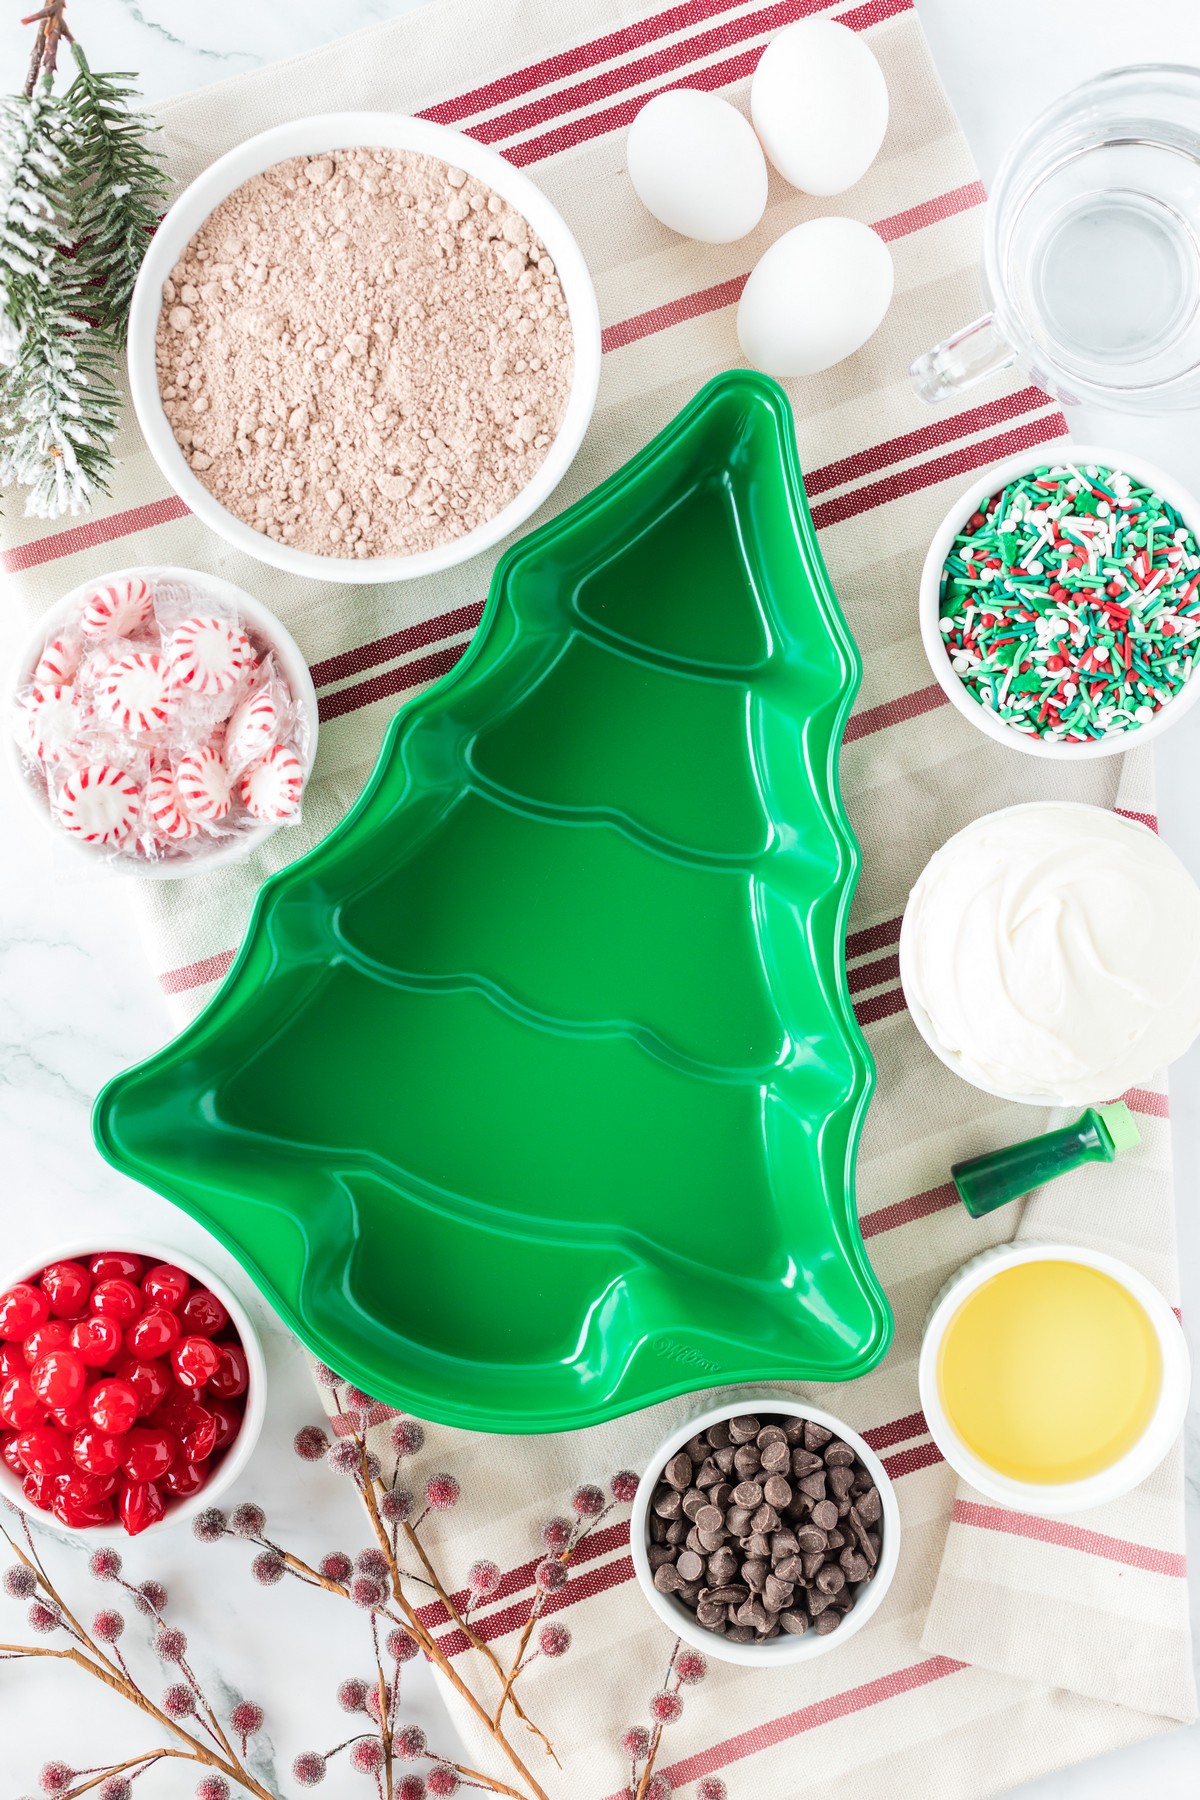 https://www.southerncravings.com/wp-content/uploads/2022/10/Christmas-Tree-Cake-1.jpg